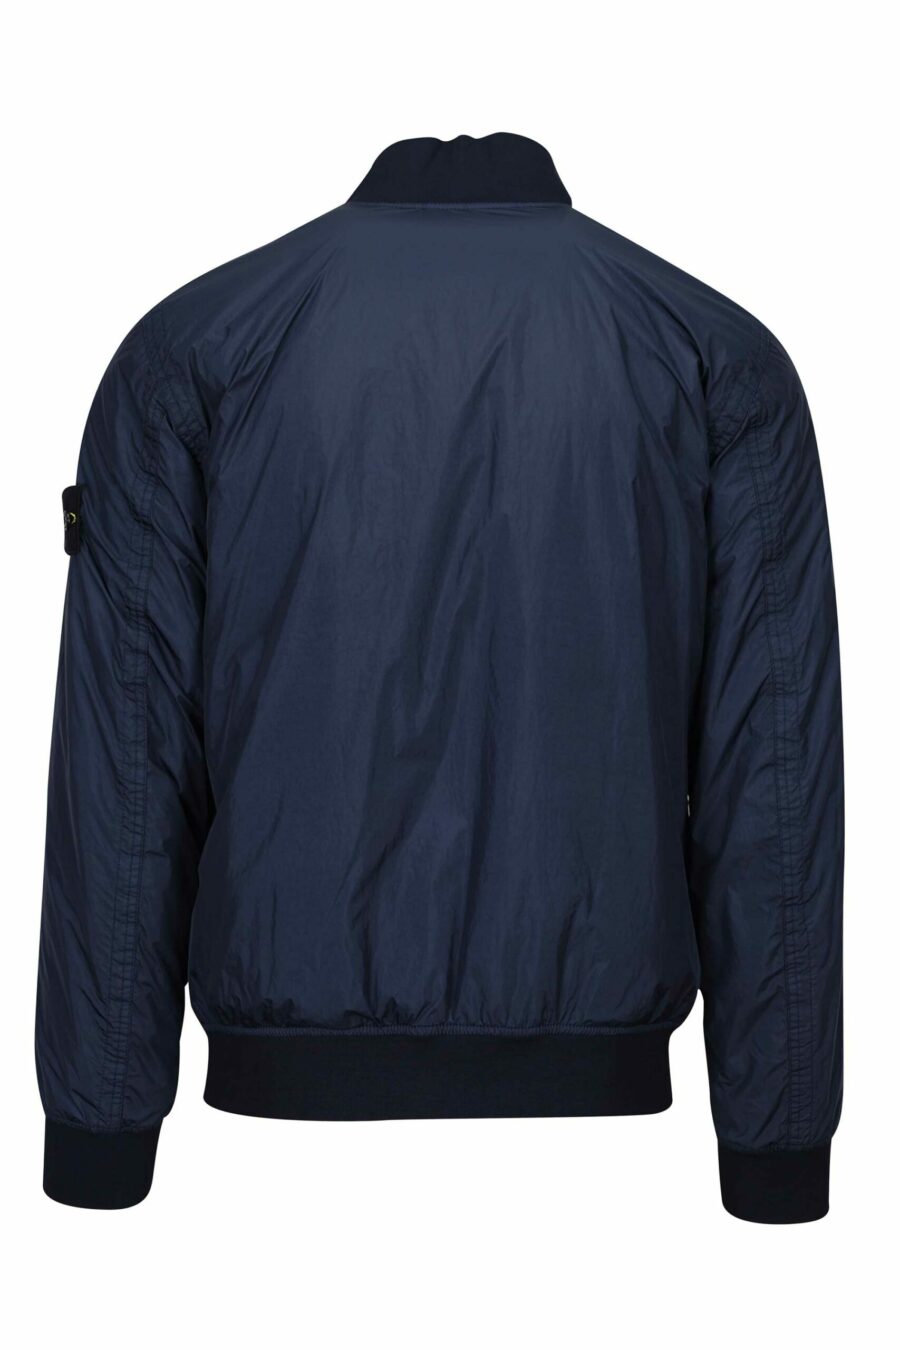 Blue jacket with logo side patch - 8052572762185 2 scaled